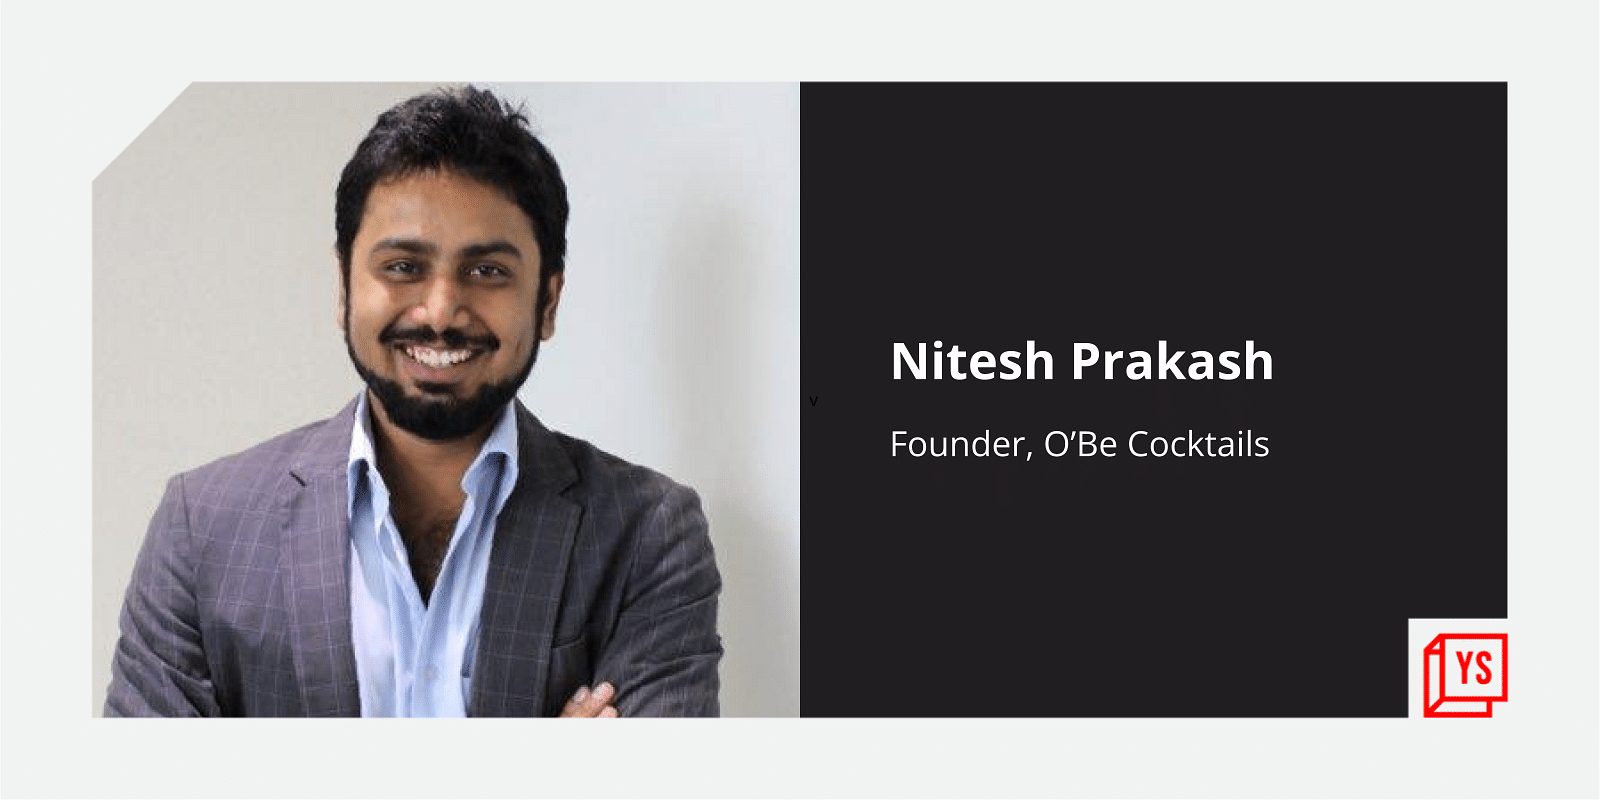 You are currently viewing Ready to drink? Meet the ex-Ola alum who launched a cocktail startup